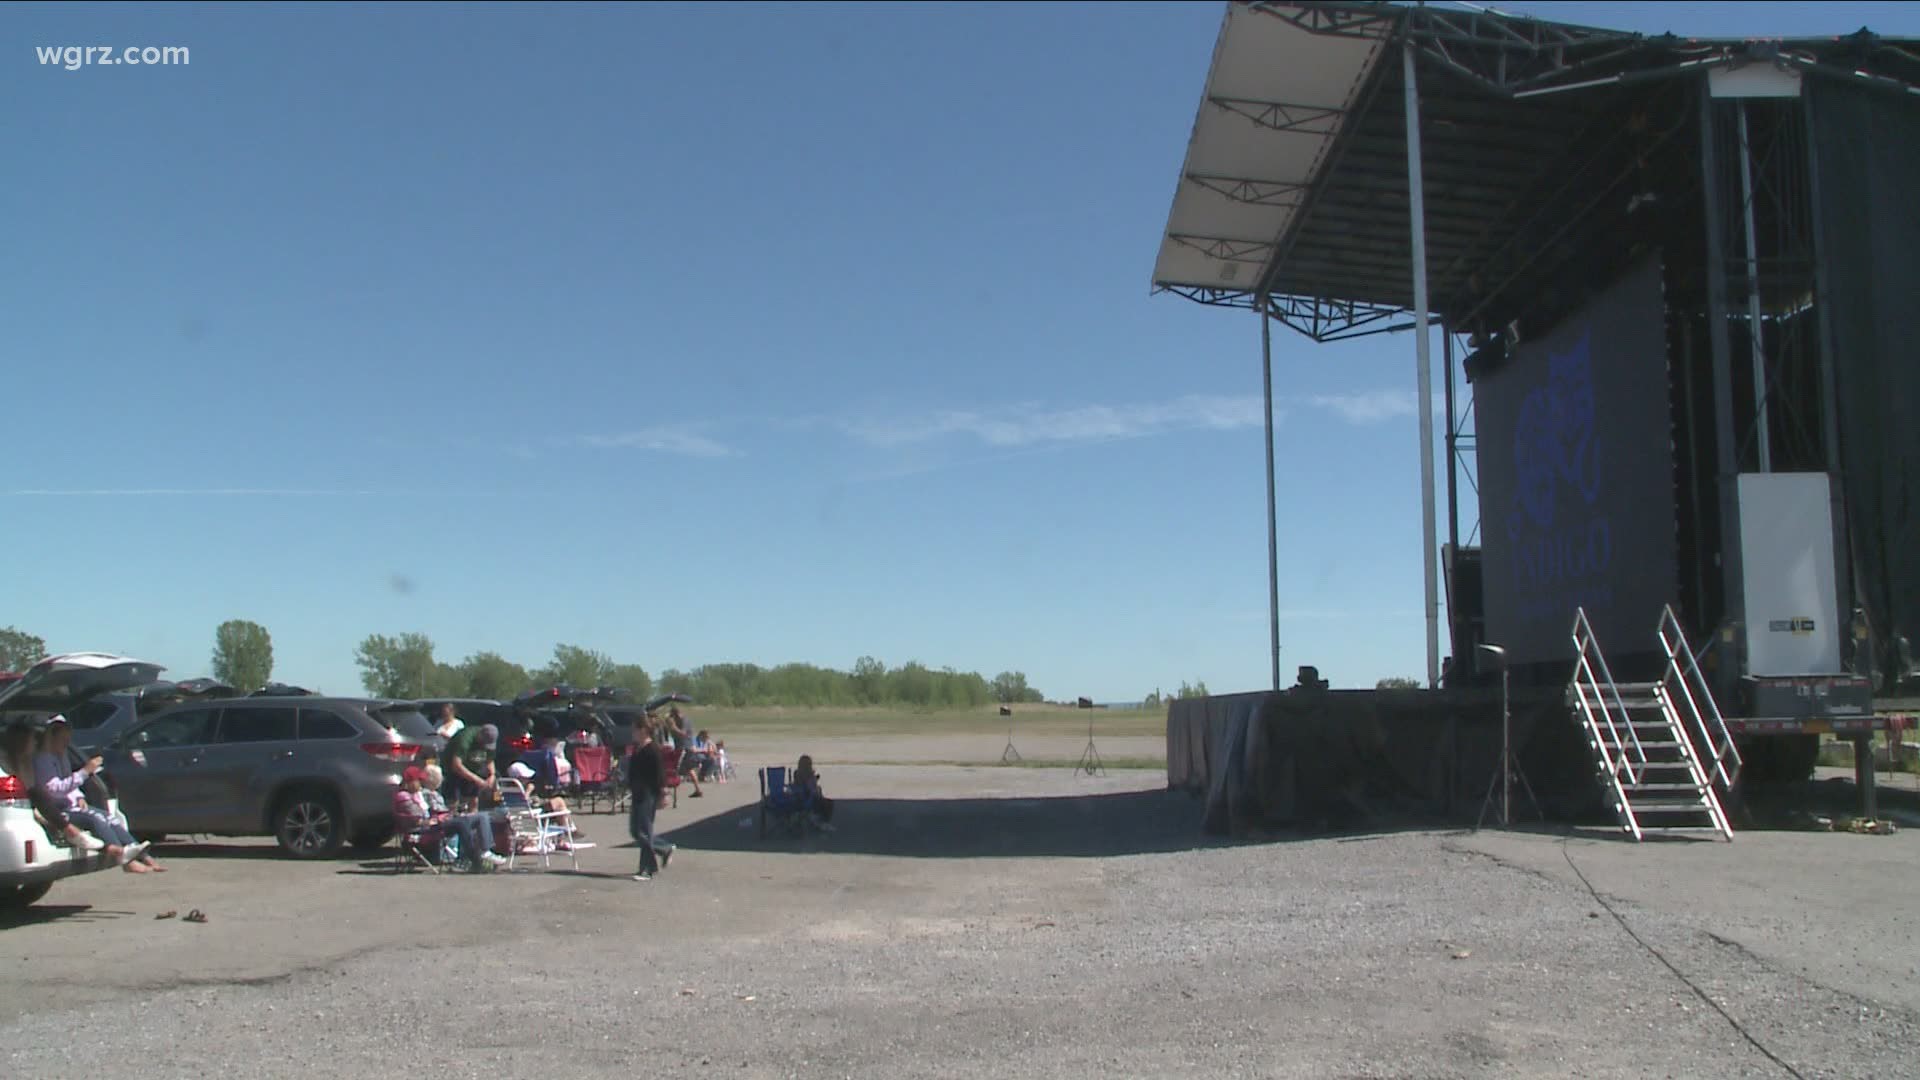 The folks at the Buffalo waterfront are bringing fun back this summer in a safe way. They're hosting their first drive-in movie series that started today.